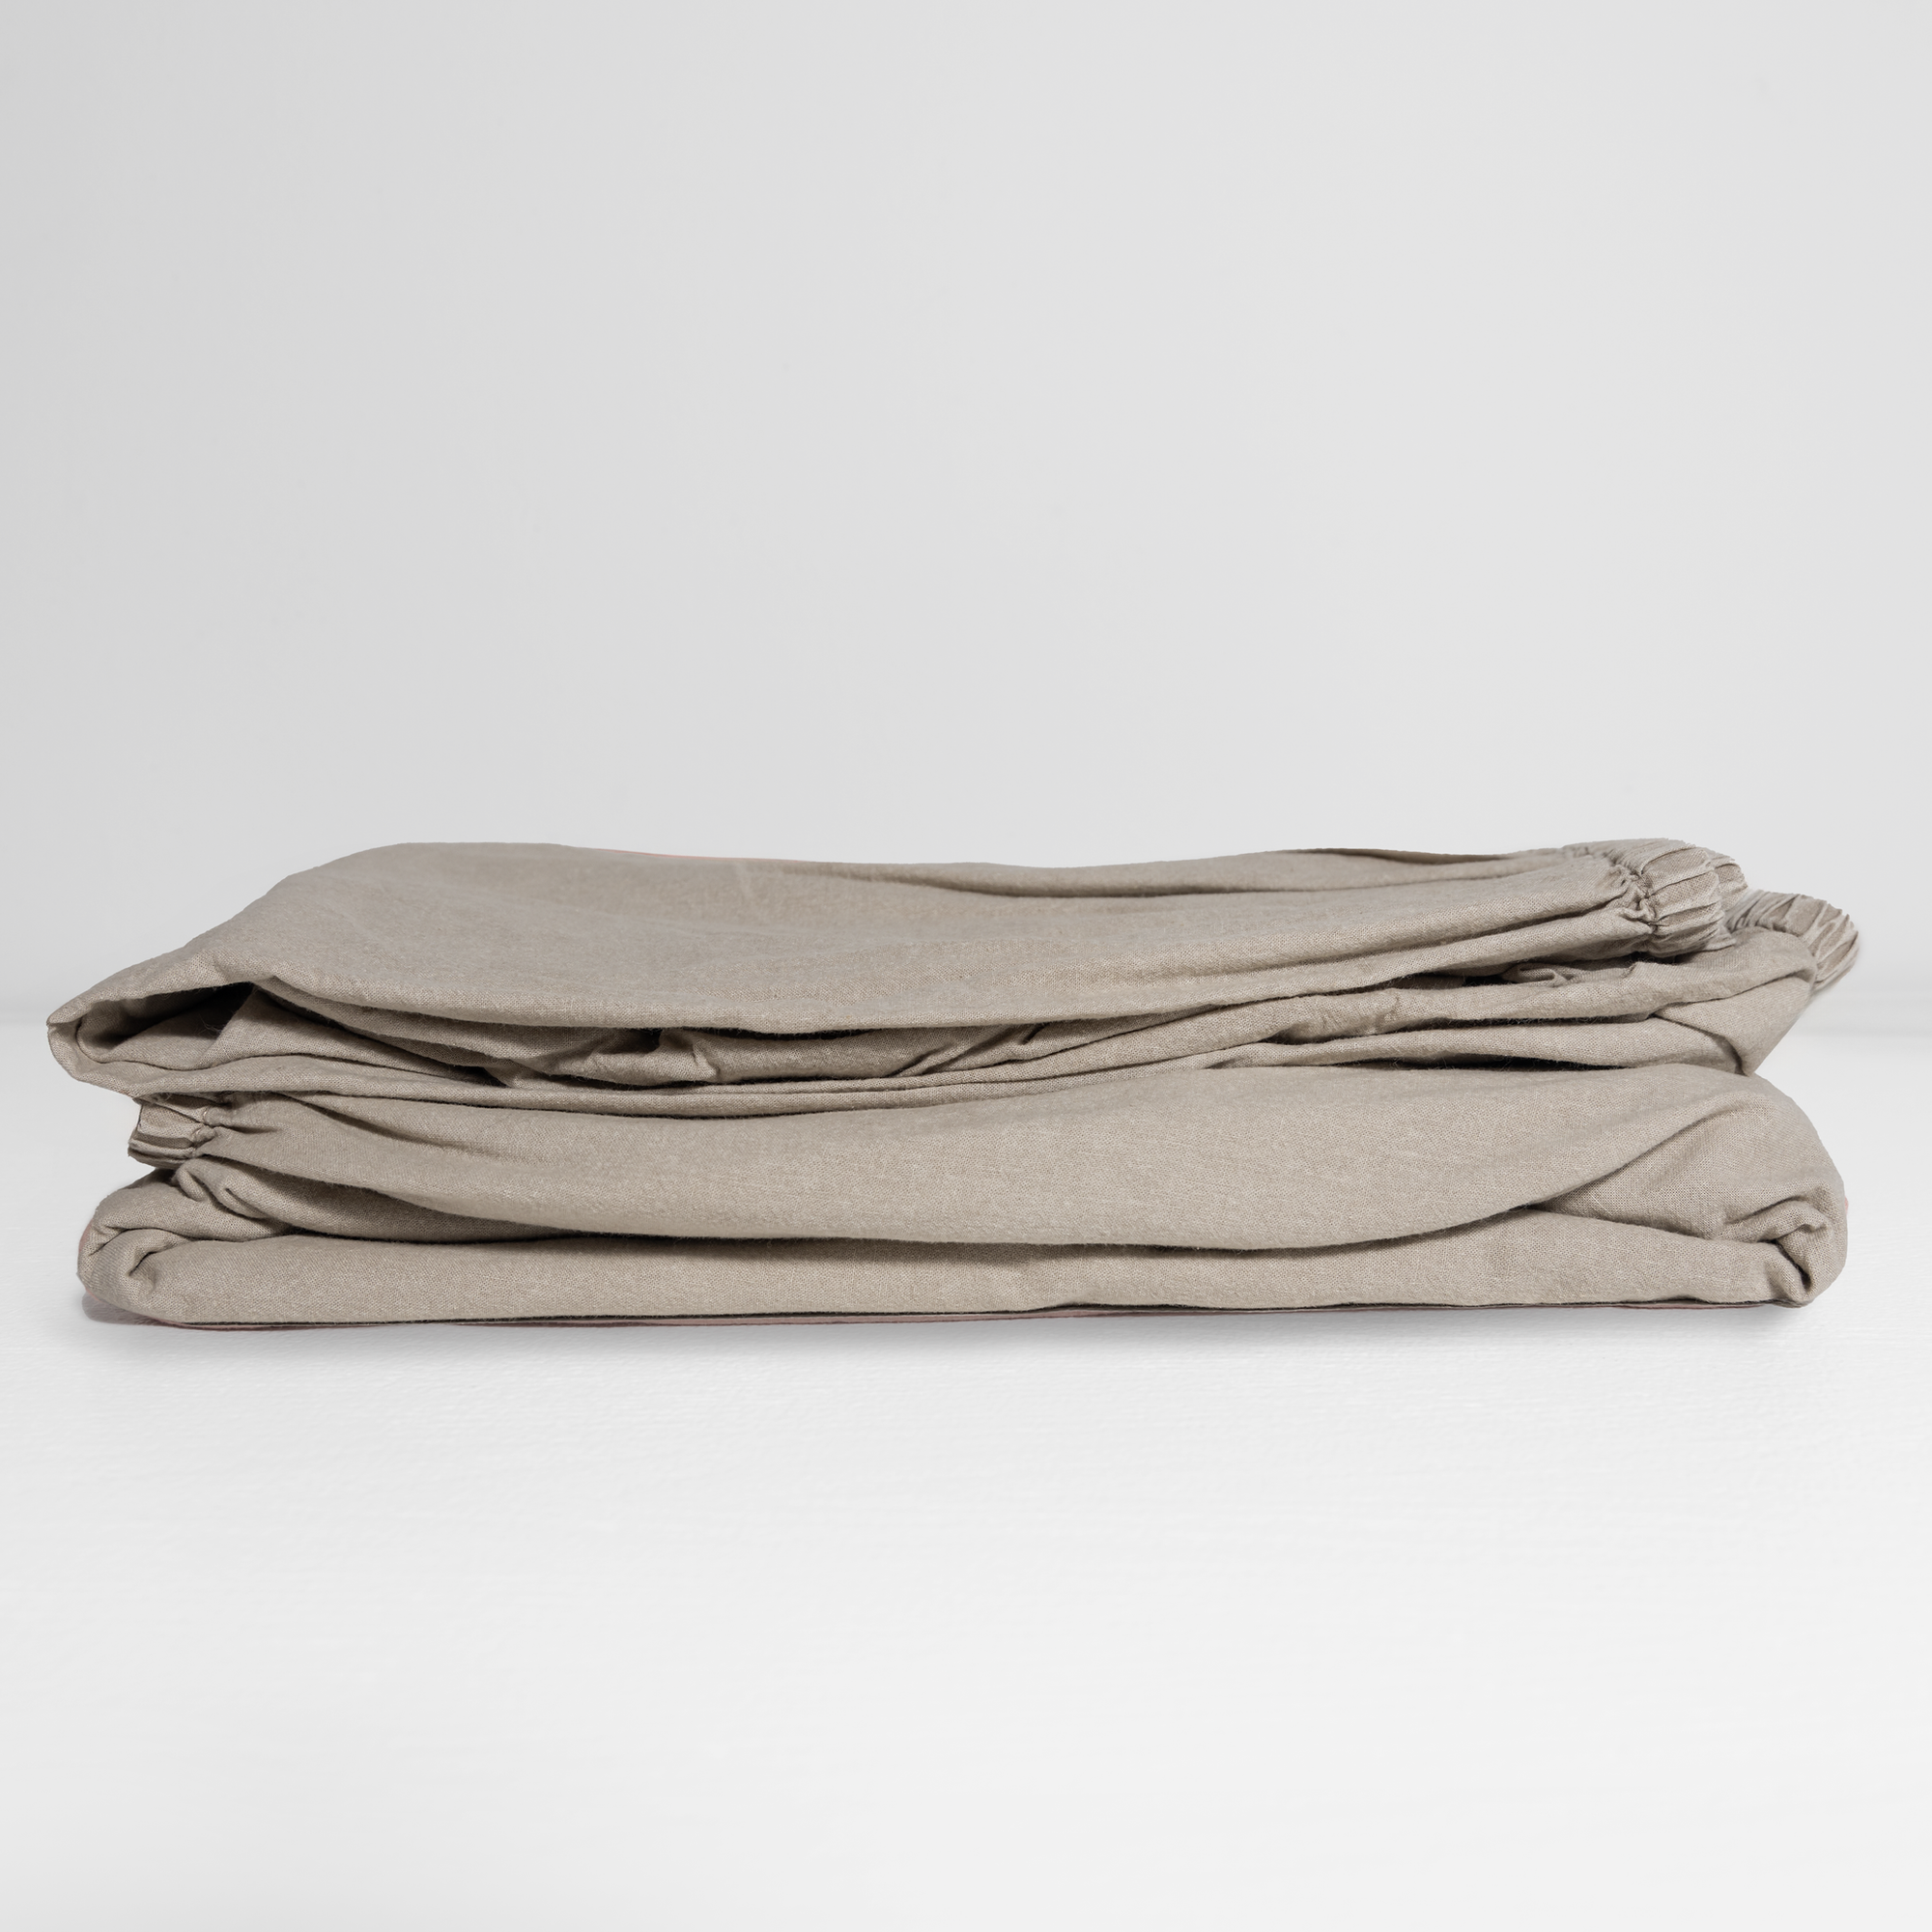 100% Organic Cotton Canvas Fitted Sheet │Queen │Natural